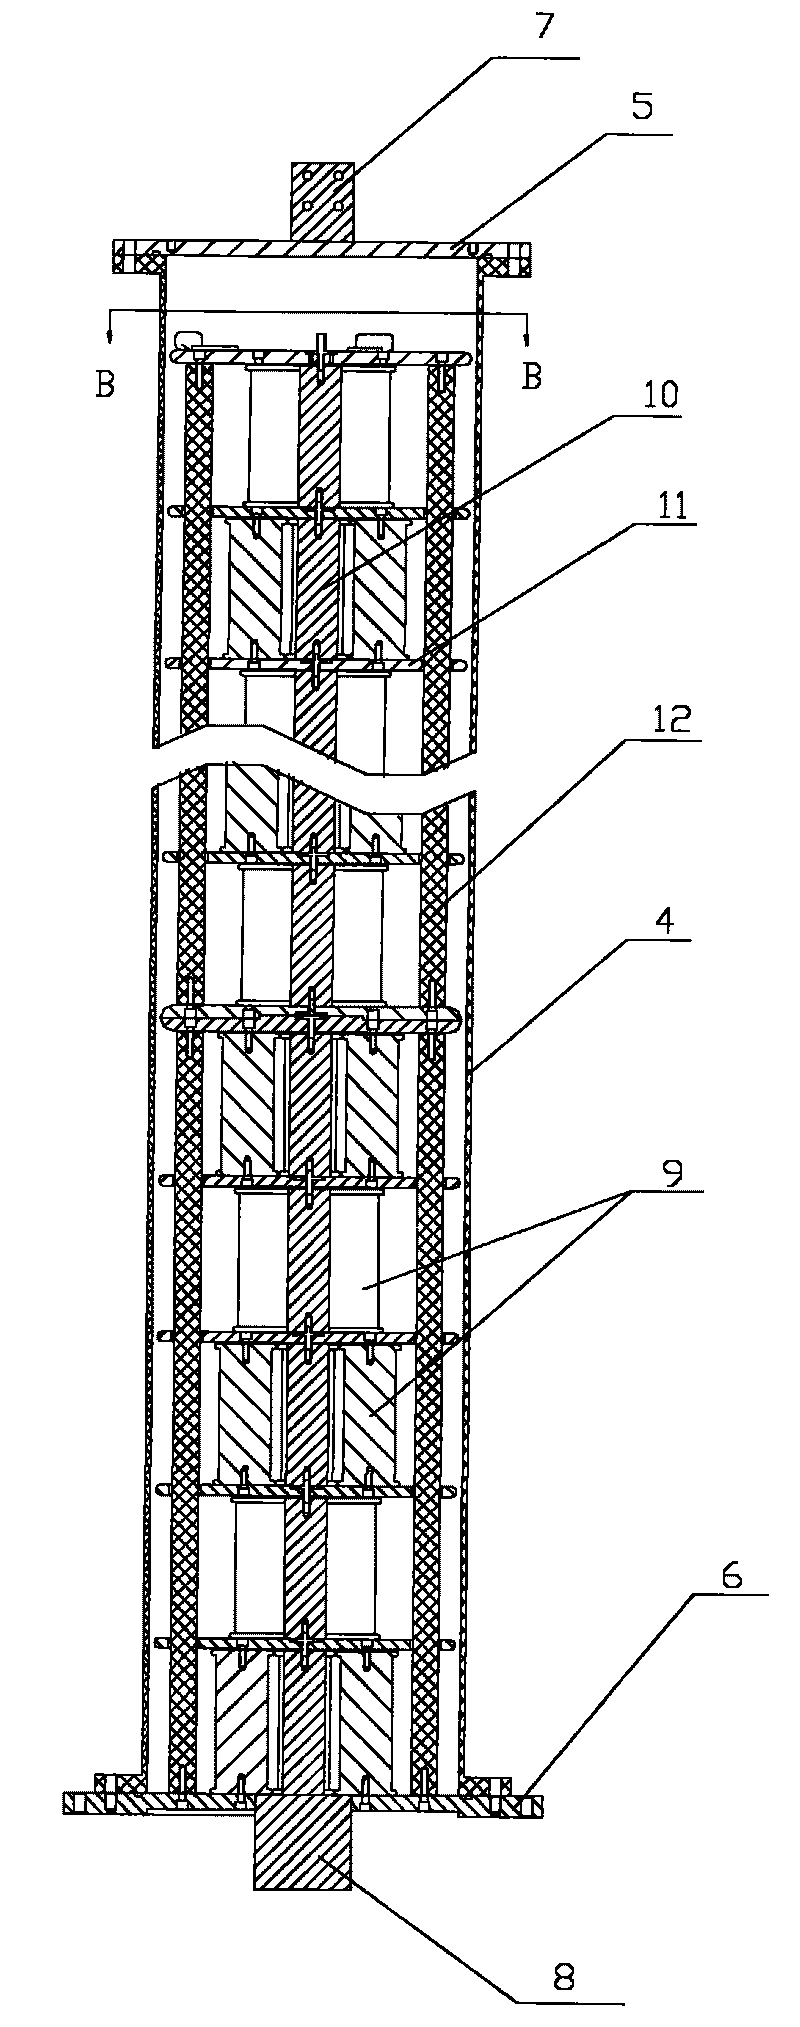 Gas insulation-based DC high voltage measuring device